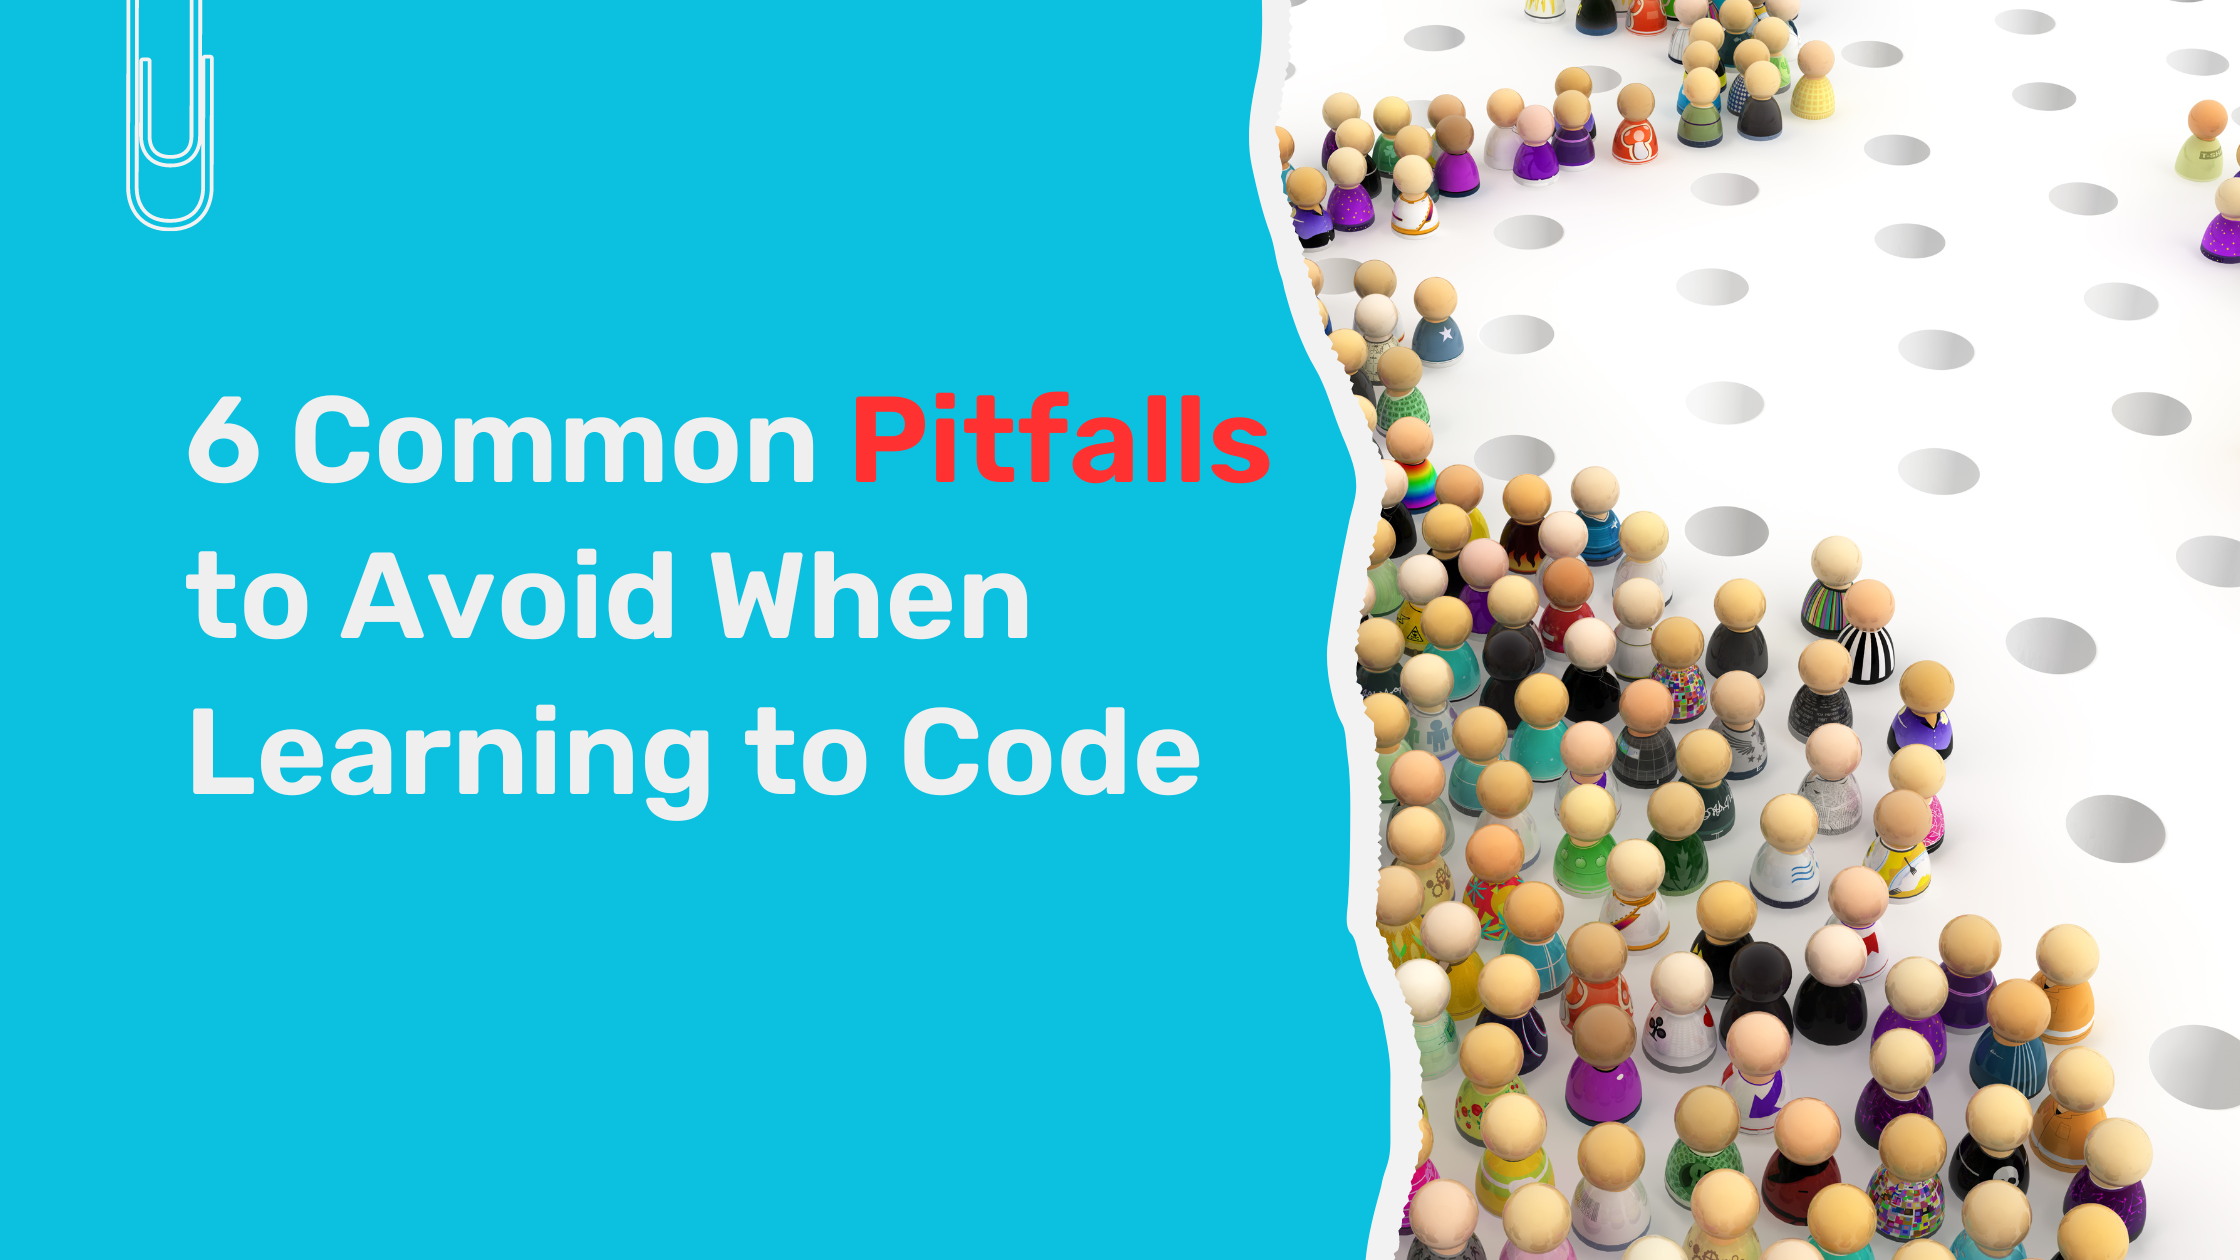 6 common pitfalls to avoid when learning to code image